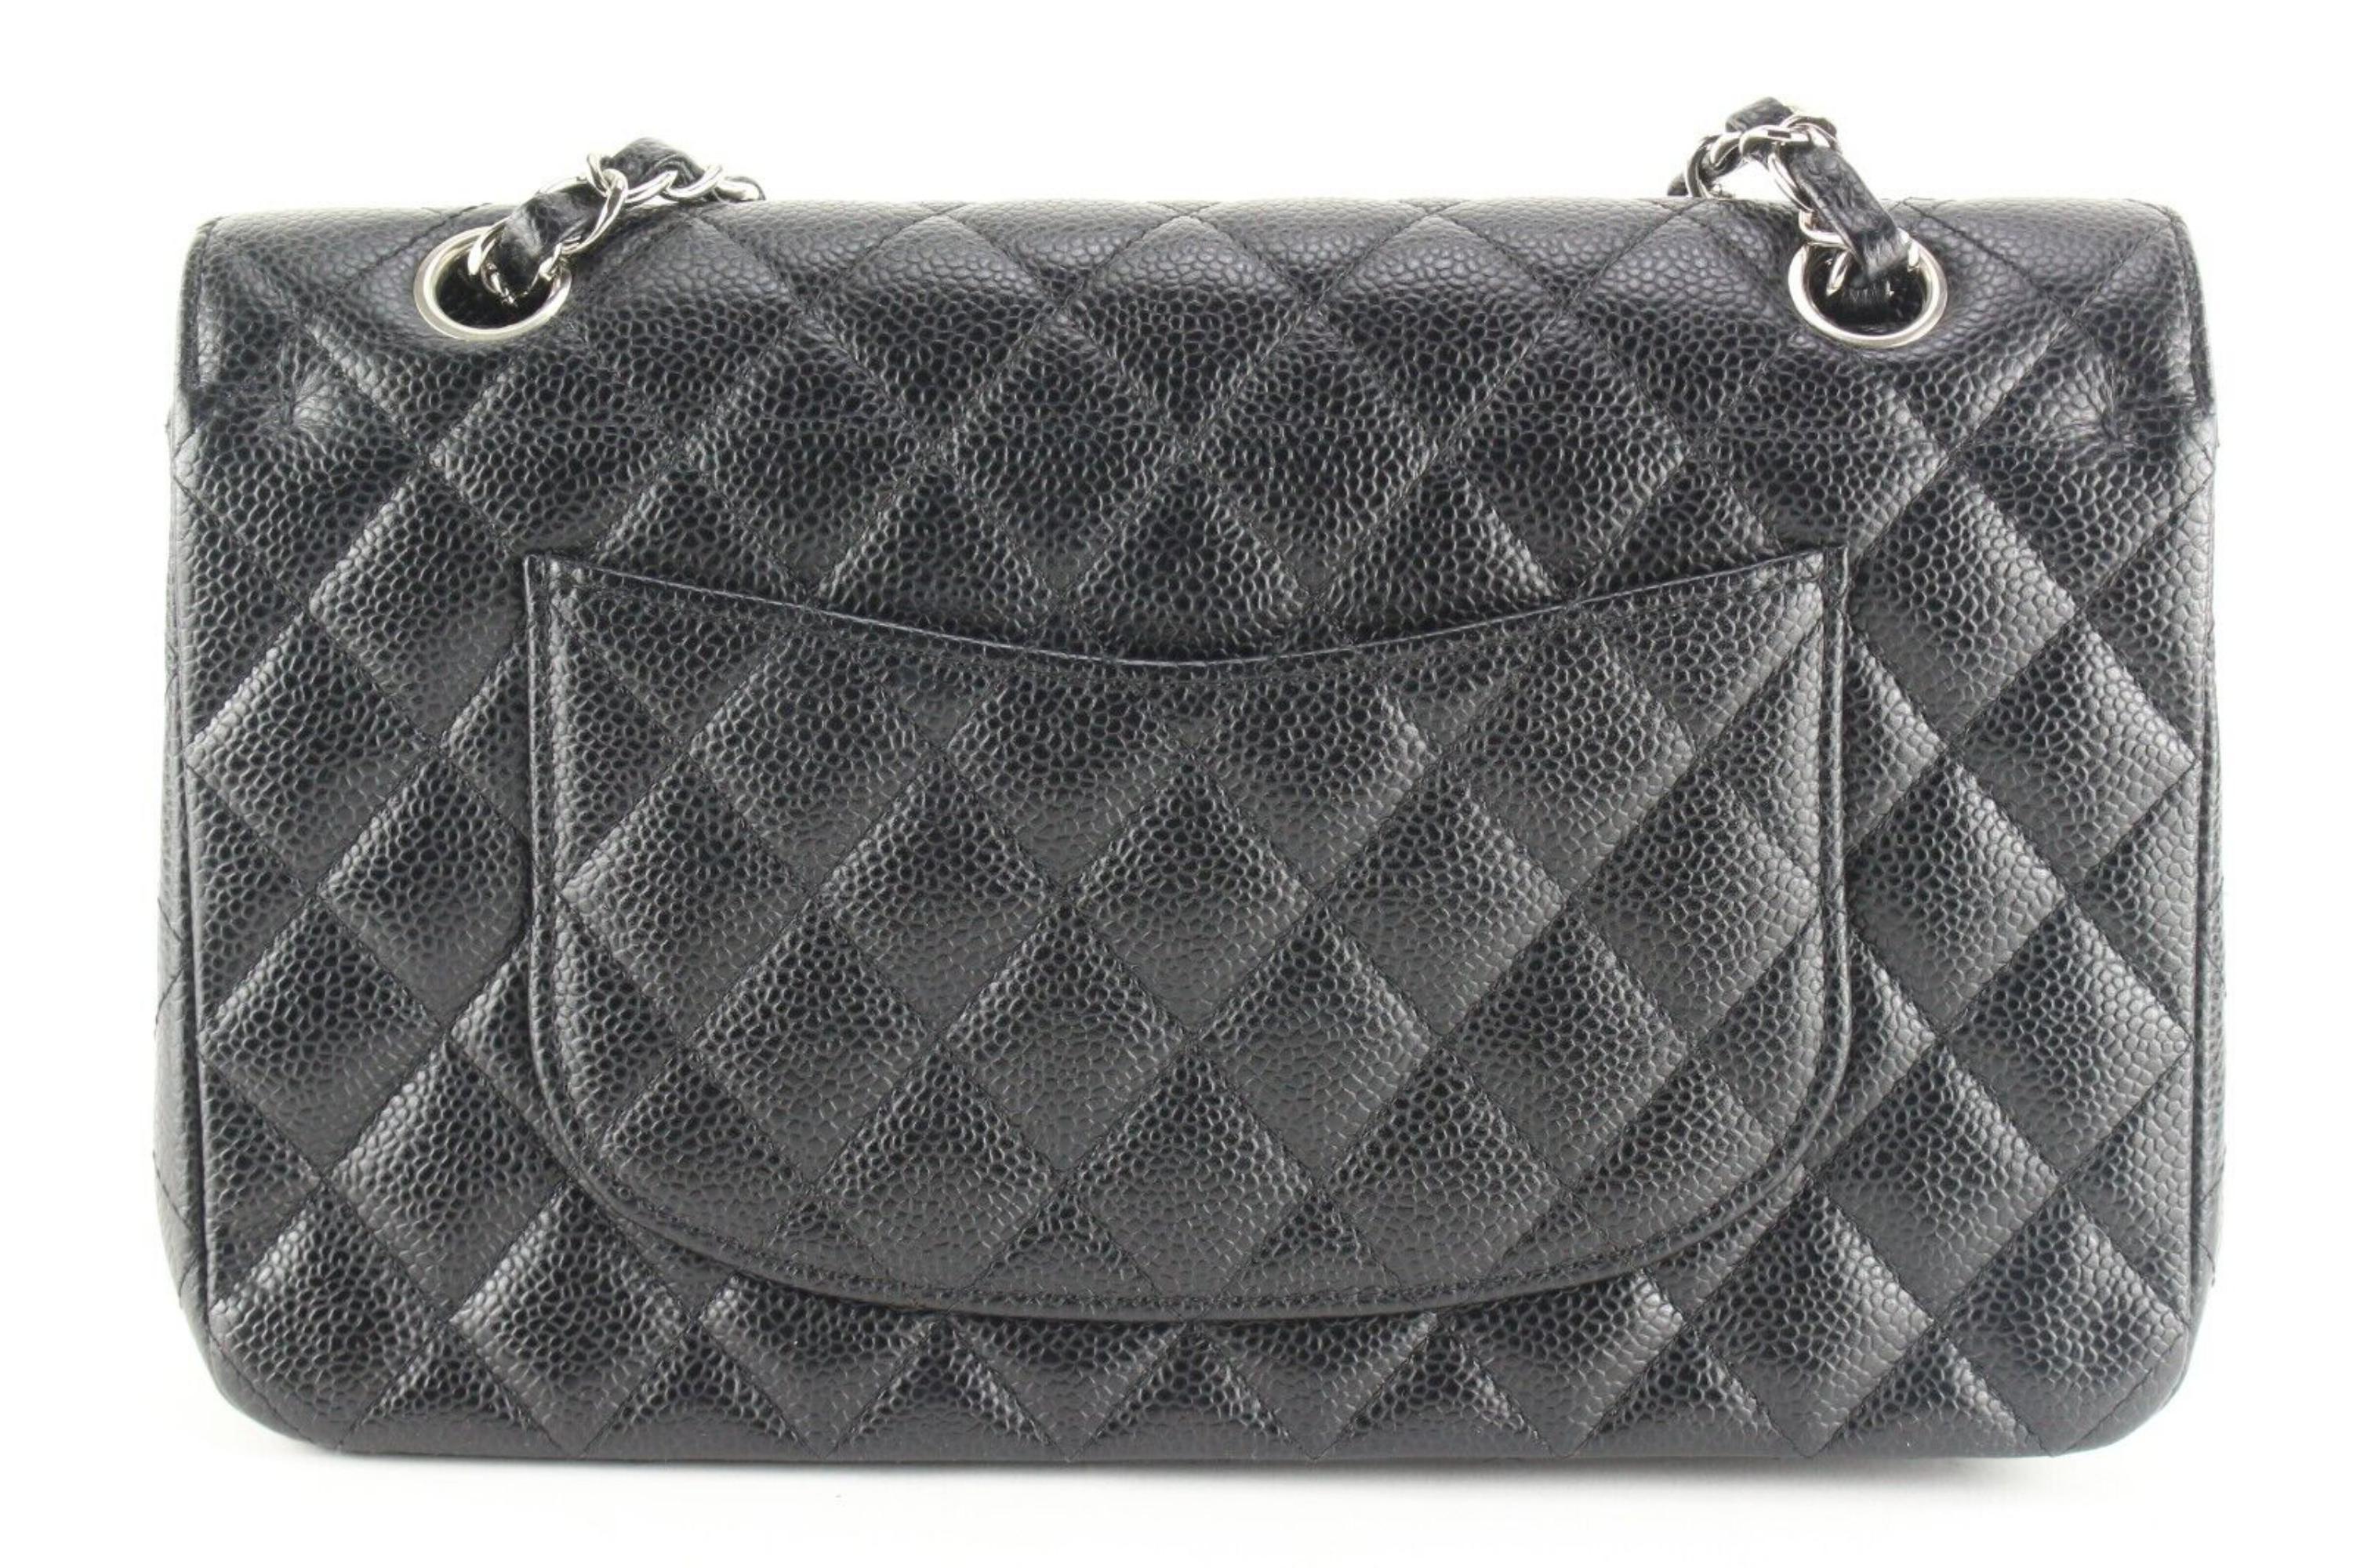 Chanel Black Quilted Caviar Leather Medium Classic Double Flap SHW 2CK0308 2